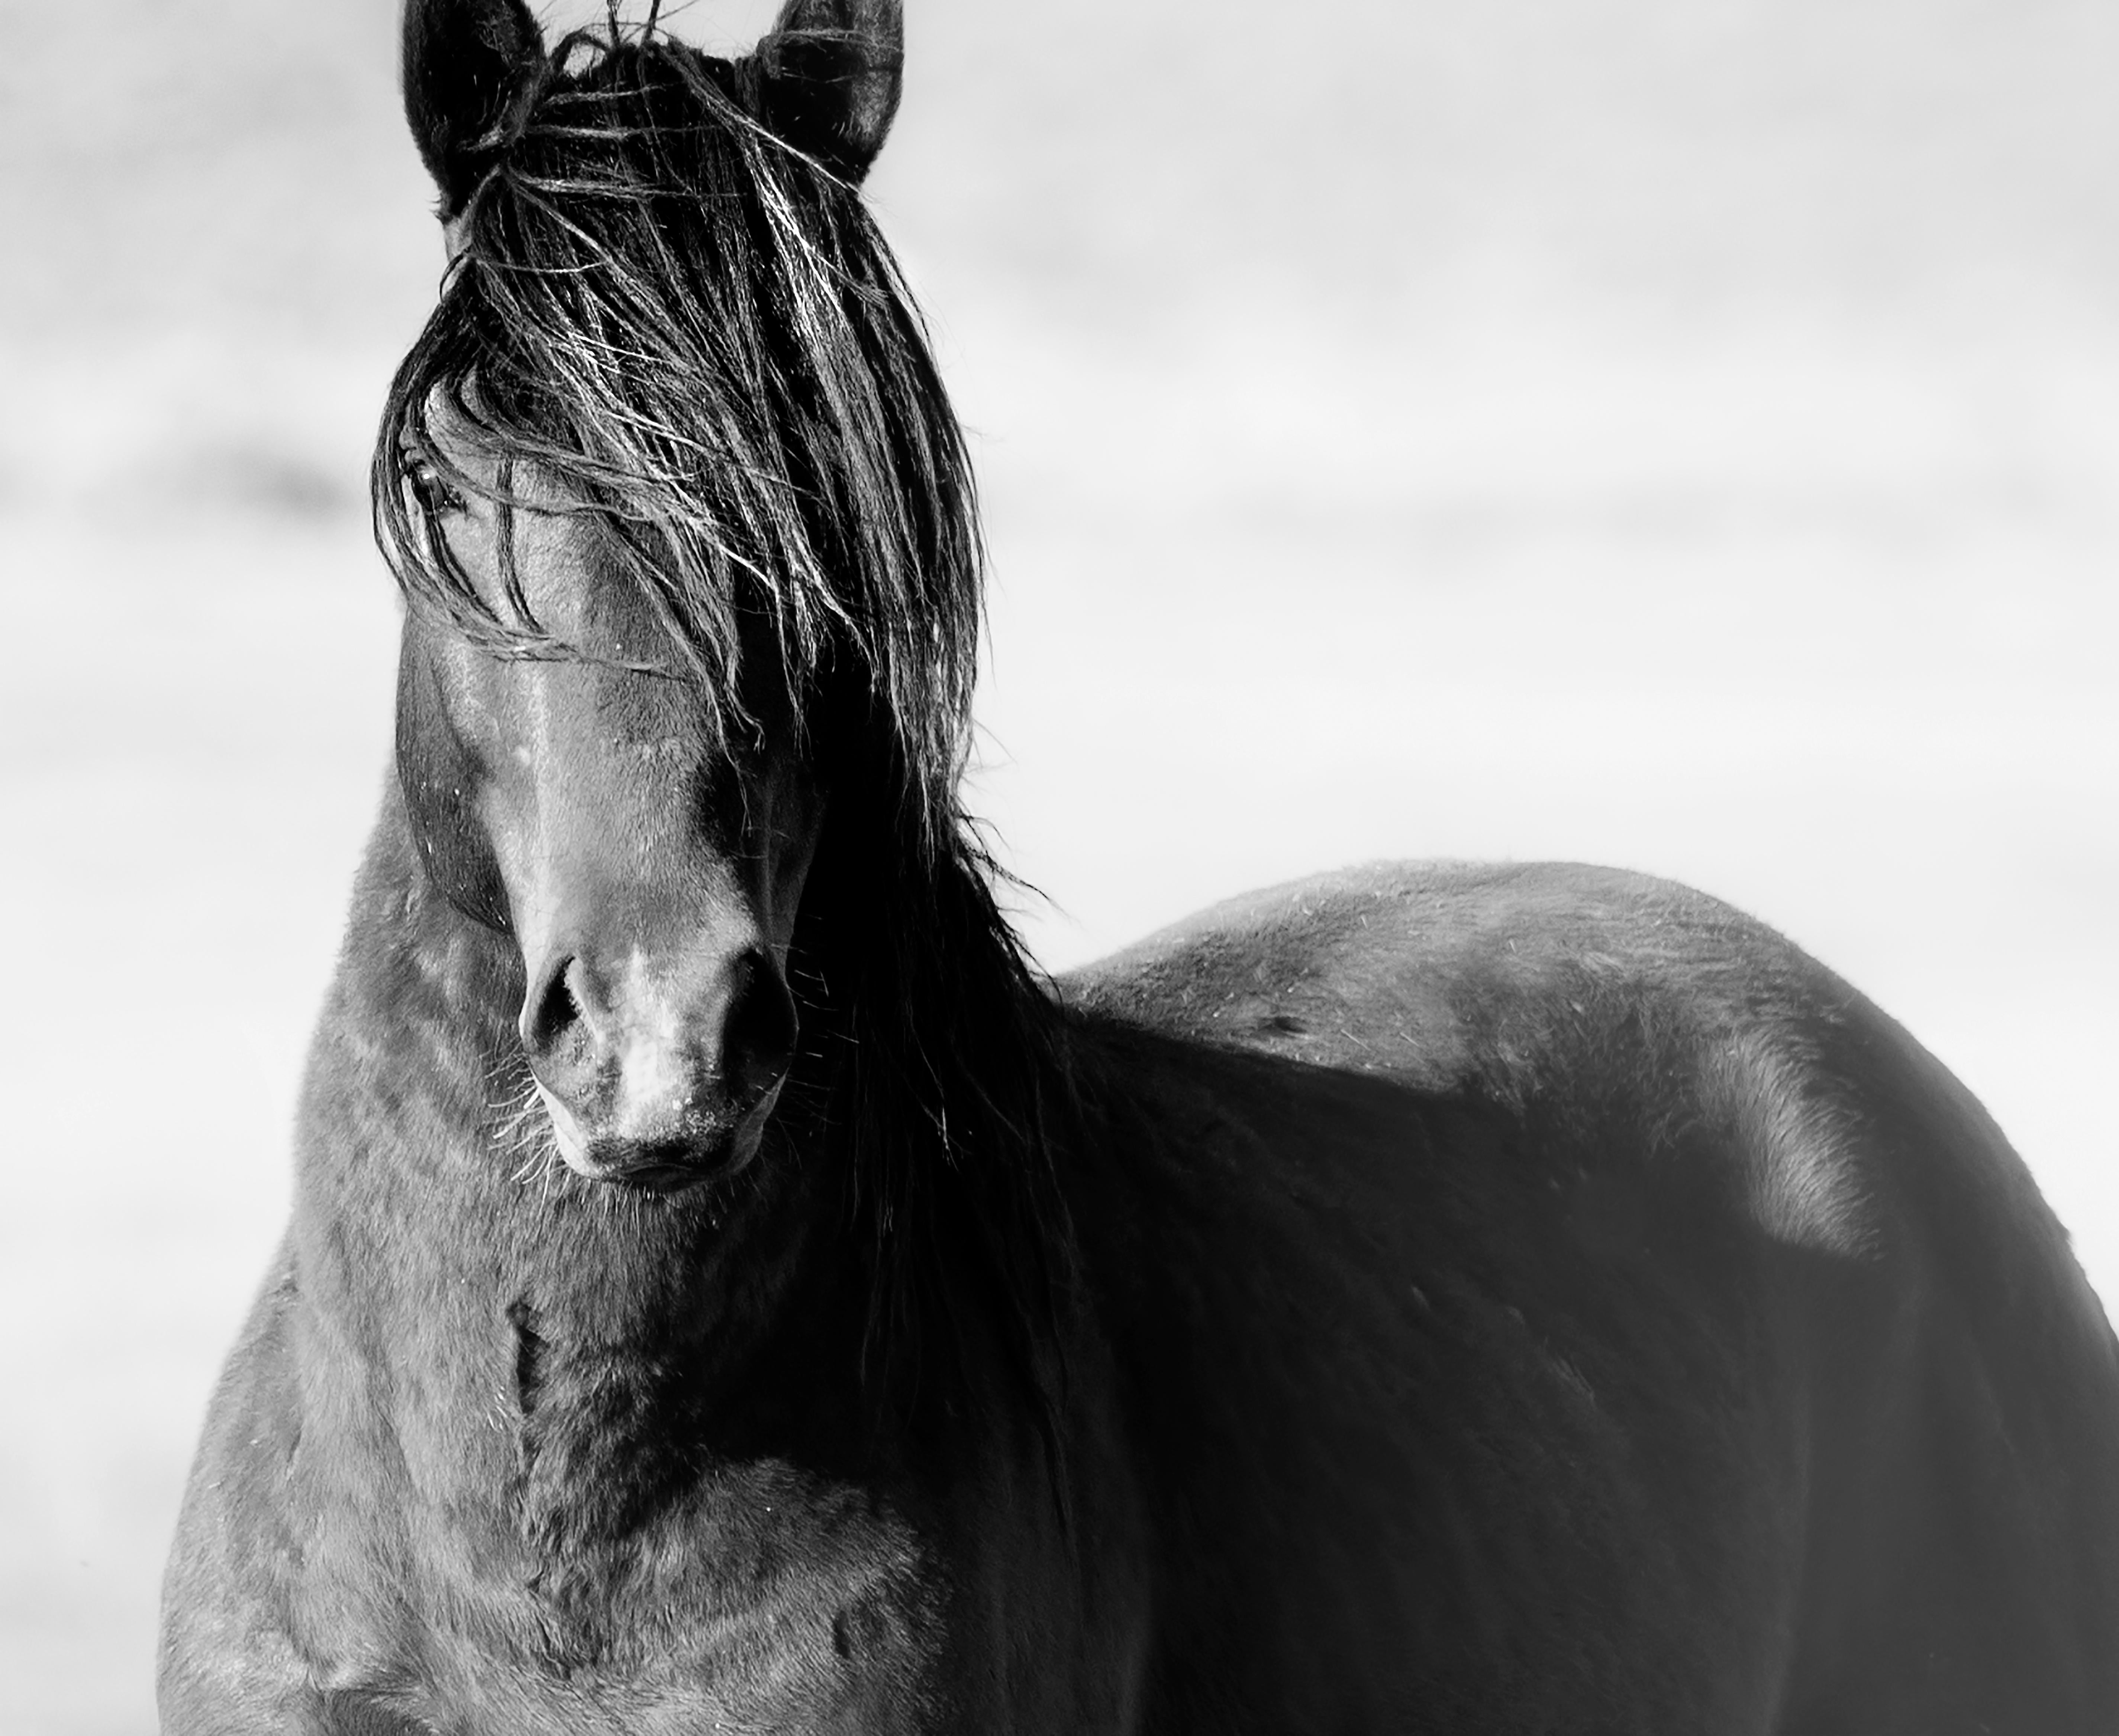 Shane Russeck Animal Print - "Wild" 40x60 Fine Art  Black and White Photography  Wild Horse Mustang 